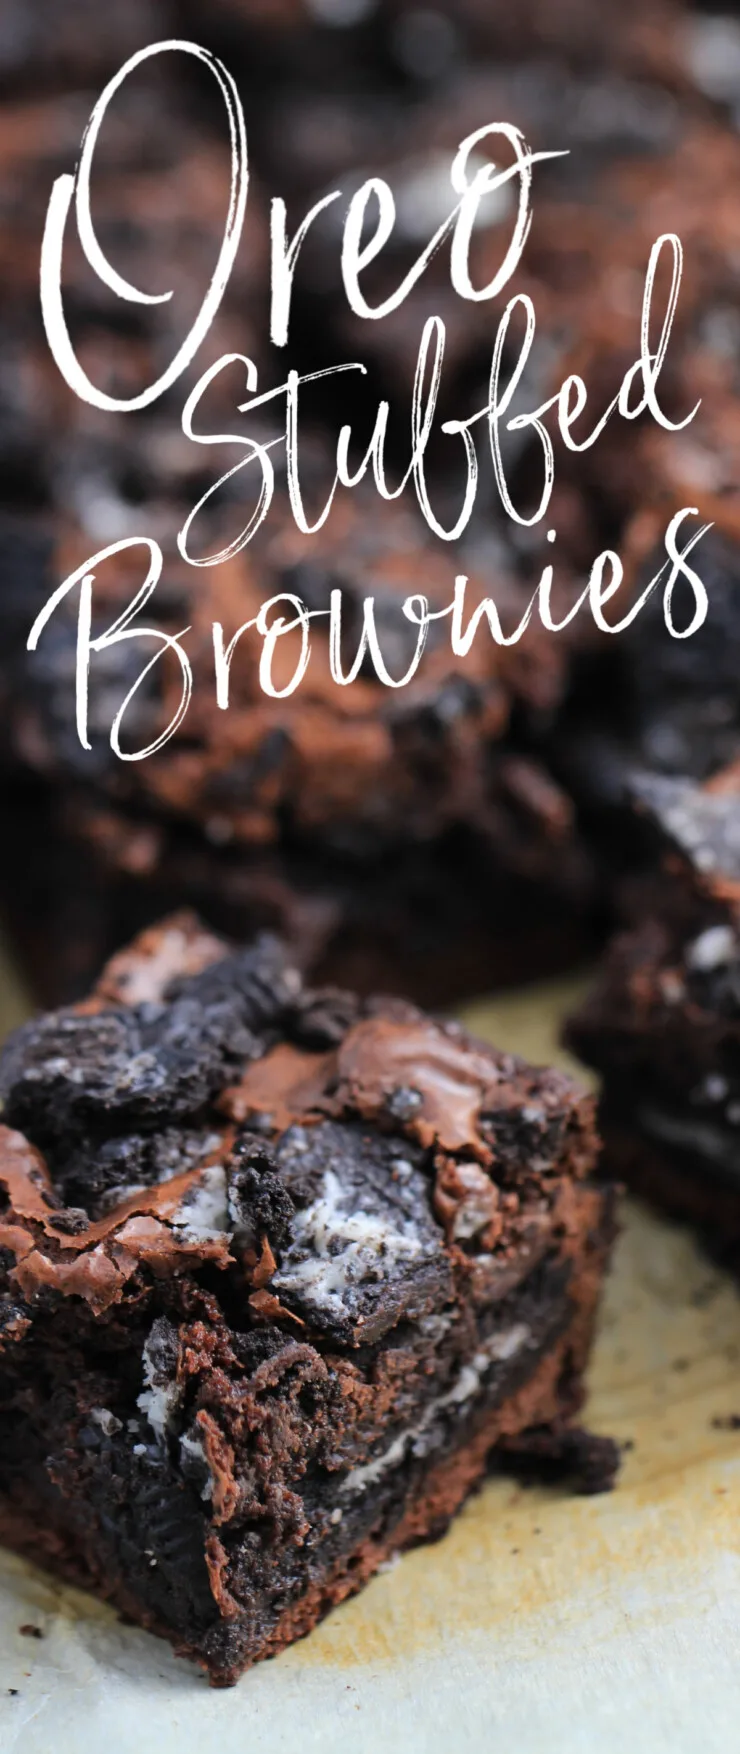 Delicious Oreo Stuffed Brownies – fudgy brownies layered with Oreos and topped with even more Oreos.  Brownies don’t get much better than this!